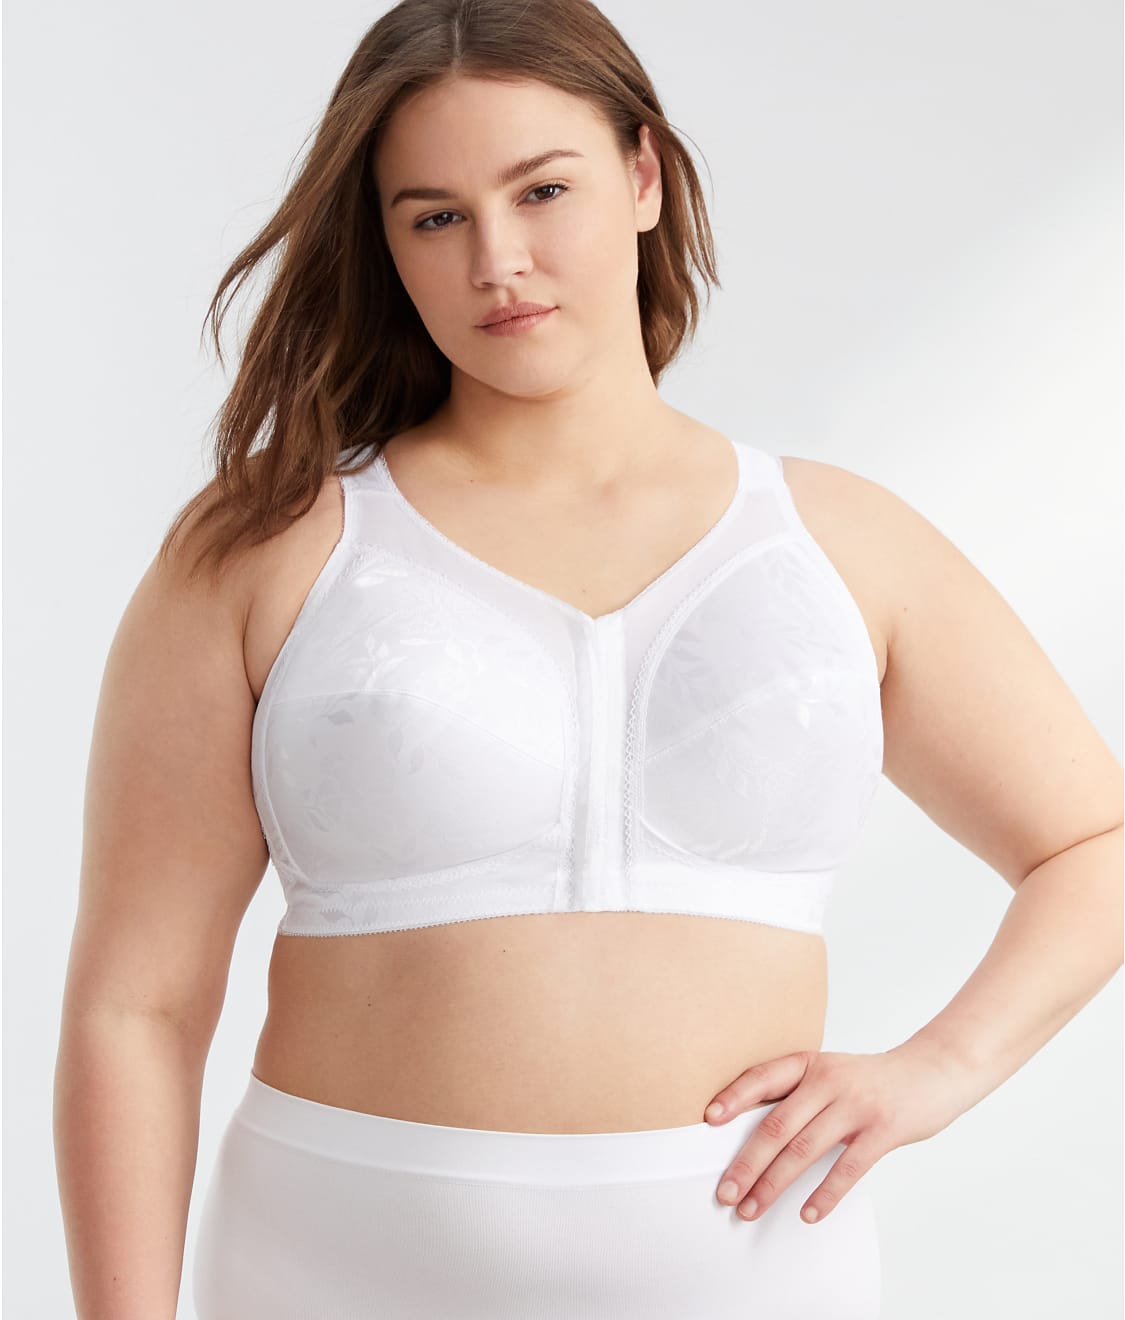 Seamless Wirefree Front Closure Bra Mesh Light Lined Full Coverage Everyday  Bralet with Straps Push Up Lift Supportive